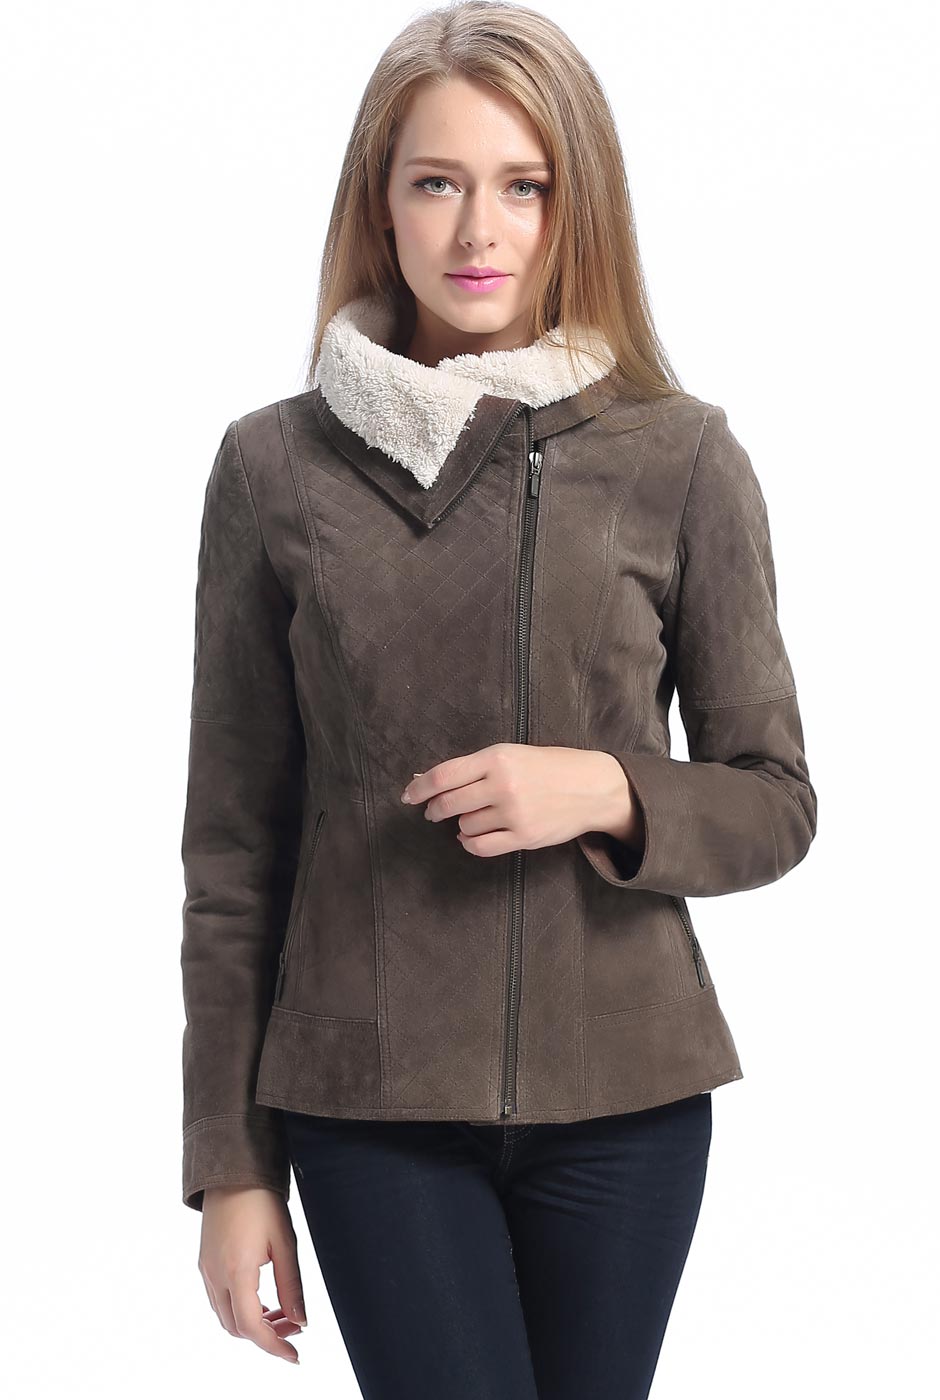 BGSD Women Liza Quilted Sherpa Suede Leather Jacket